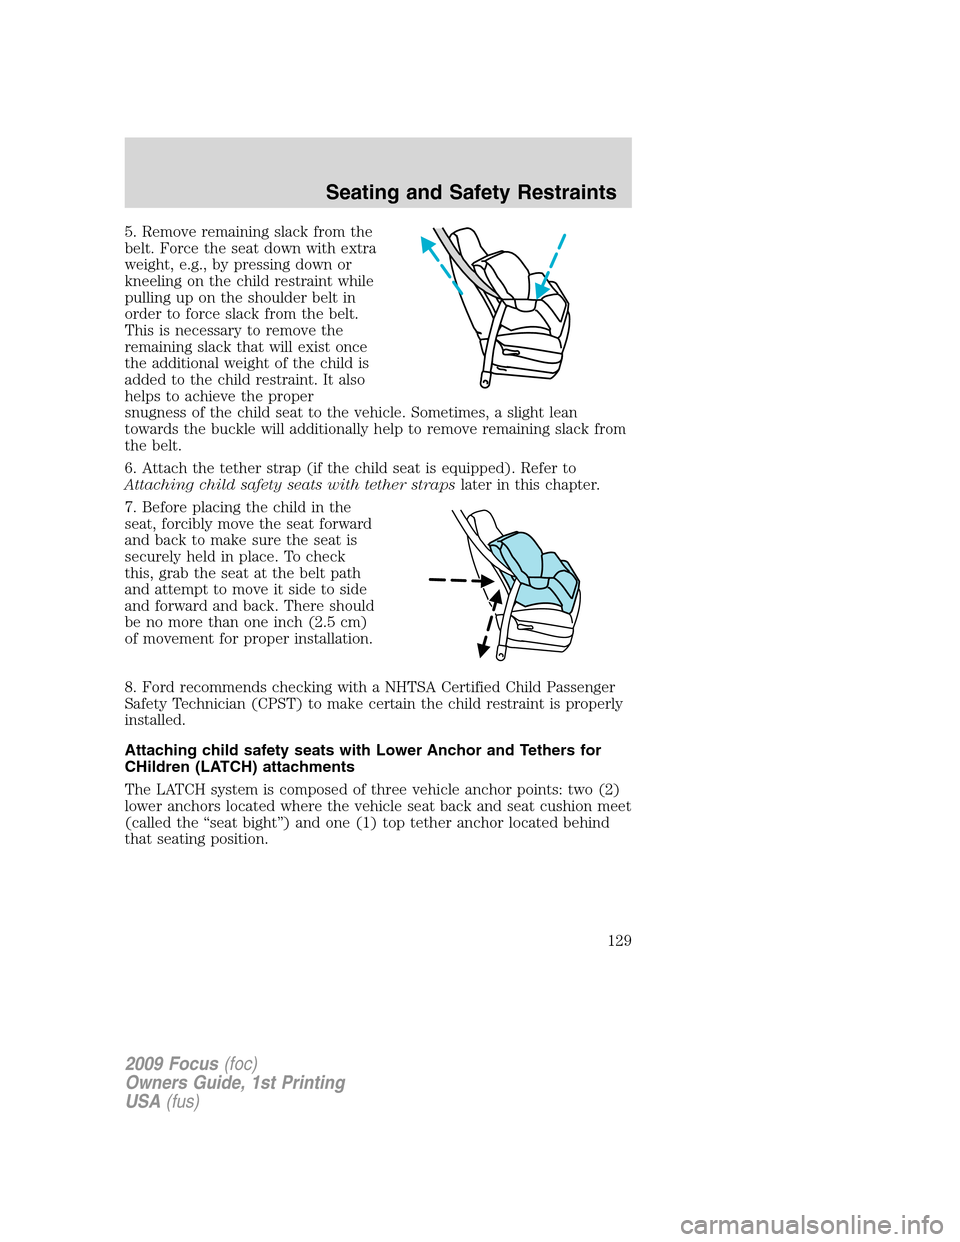 FORD FOCUS 2009 2.G Owners Manual 5. Remove remaining slack from the
belt. Force the seat down with extra
weight, e.g., by pressing down or
kneeling on the child restraint while
pulling up on the shoulder belt in
order to force slack 